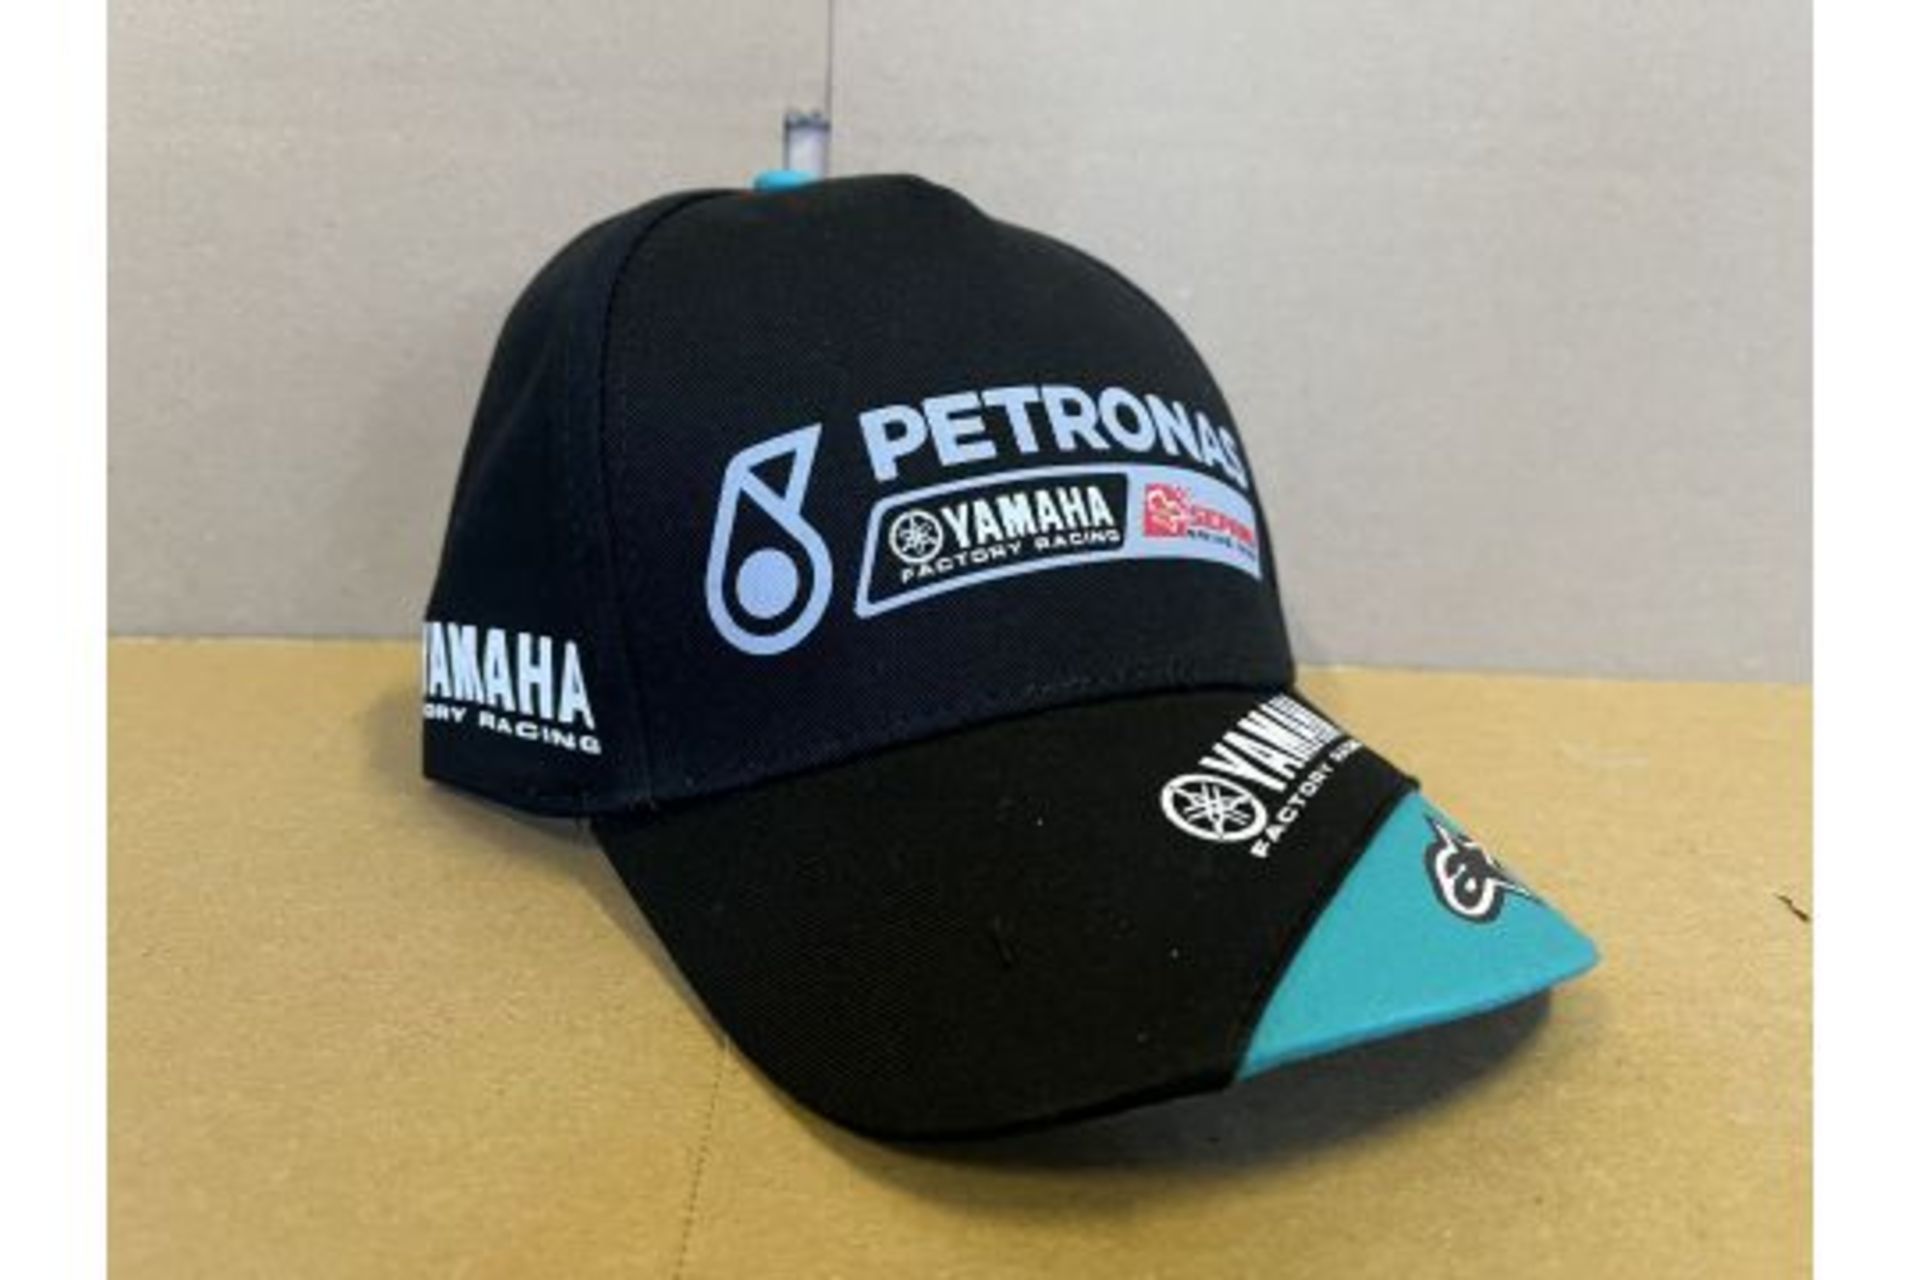 (NO VAT) 25 X BRAND NEW OFFICIAL CHILDRENS BLACK AND GREEN YAMAHA PETRONAS CAPS S1-P